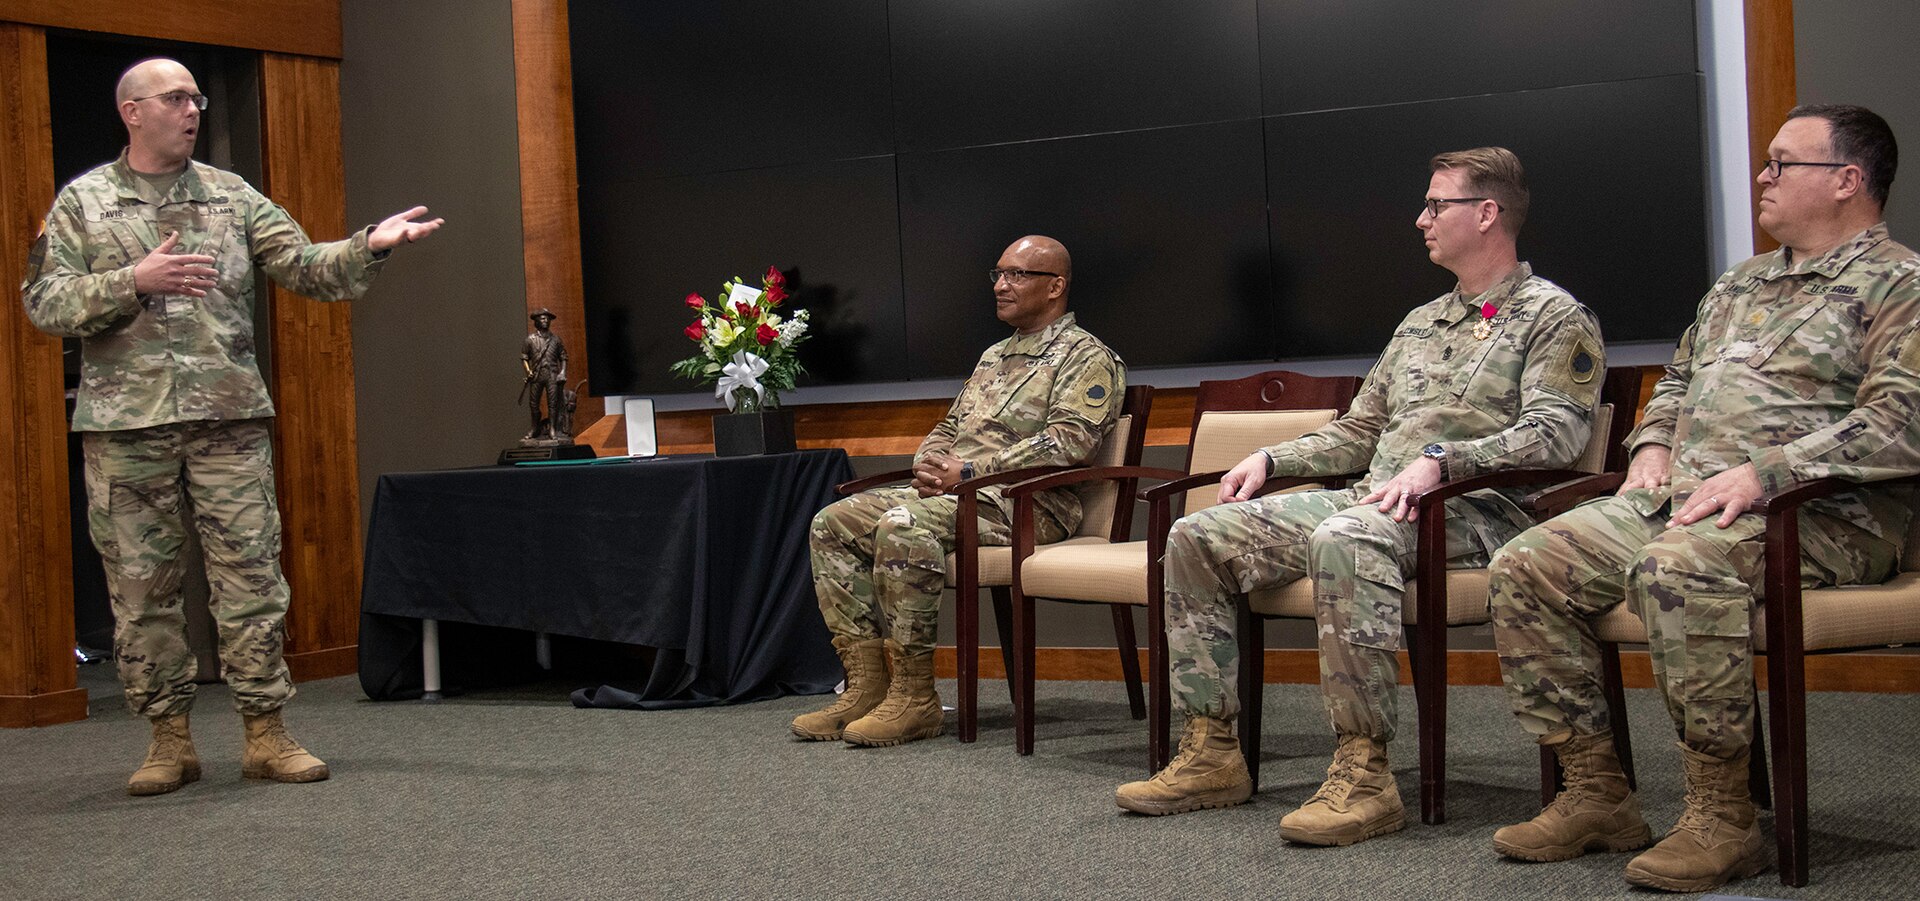 Col. Eric Davis, Director, Plans, Training and Operations, Illinois Army National Guard, thanks Sgt. Maj. David Owsley for his nearly 33 years of military service.